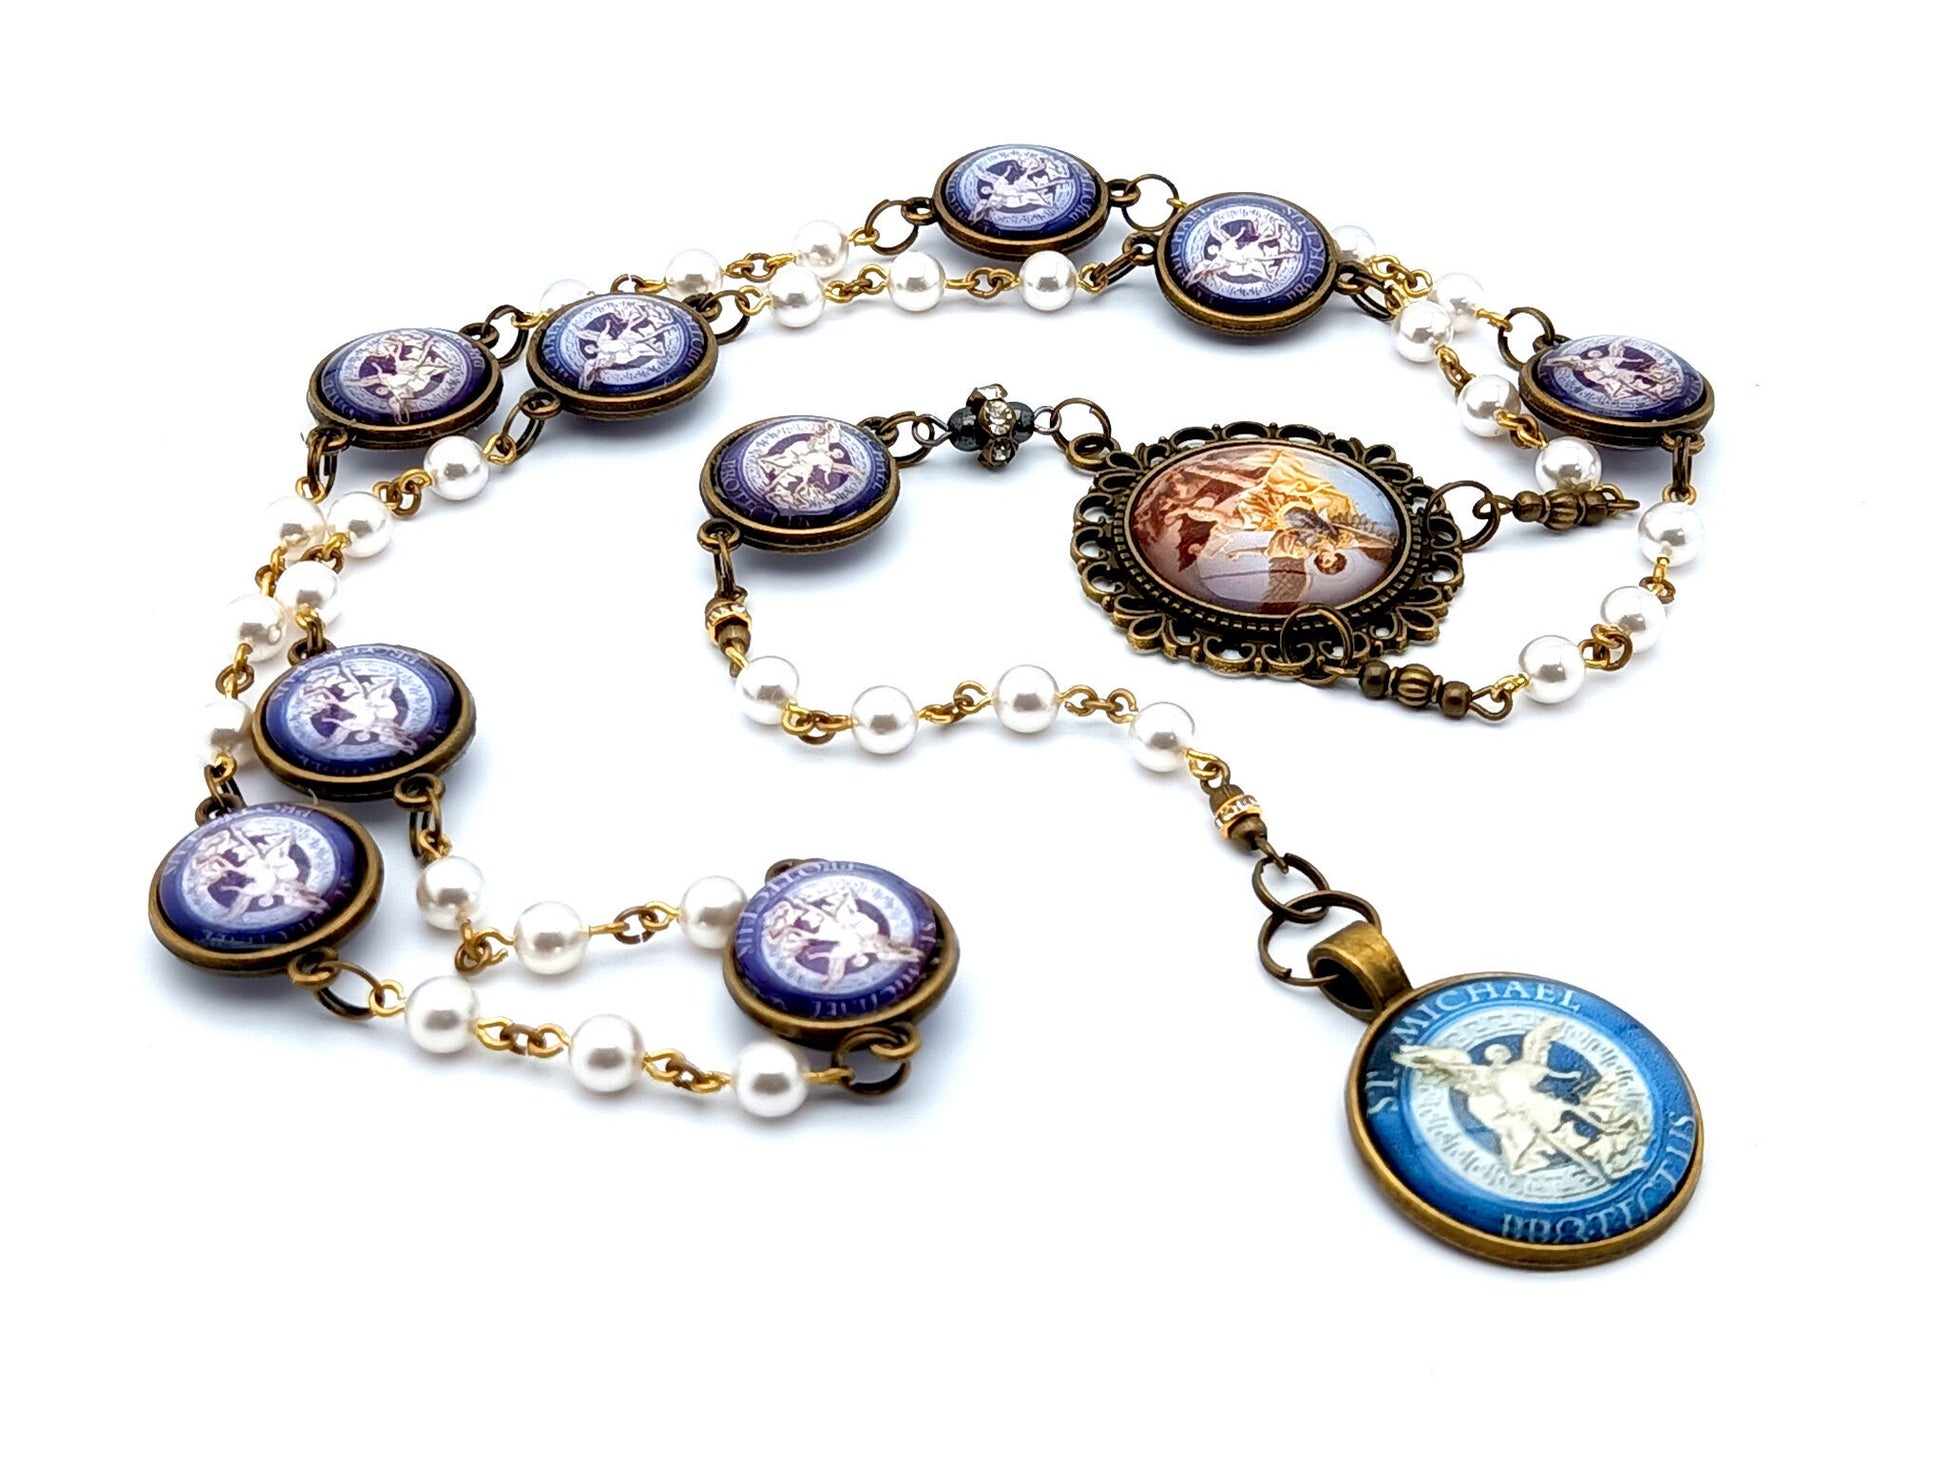 Saint Michael unique rosary beads vintage style pearl prayer chaplet with domed Saint Michael linking picture medals and large brass domed picture medal.